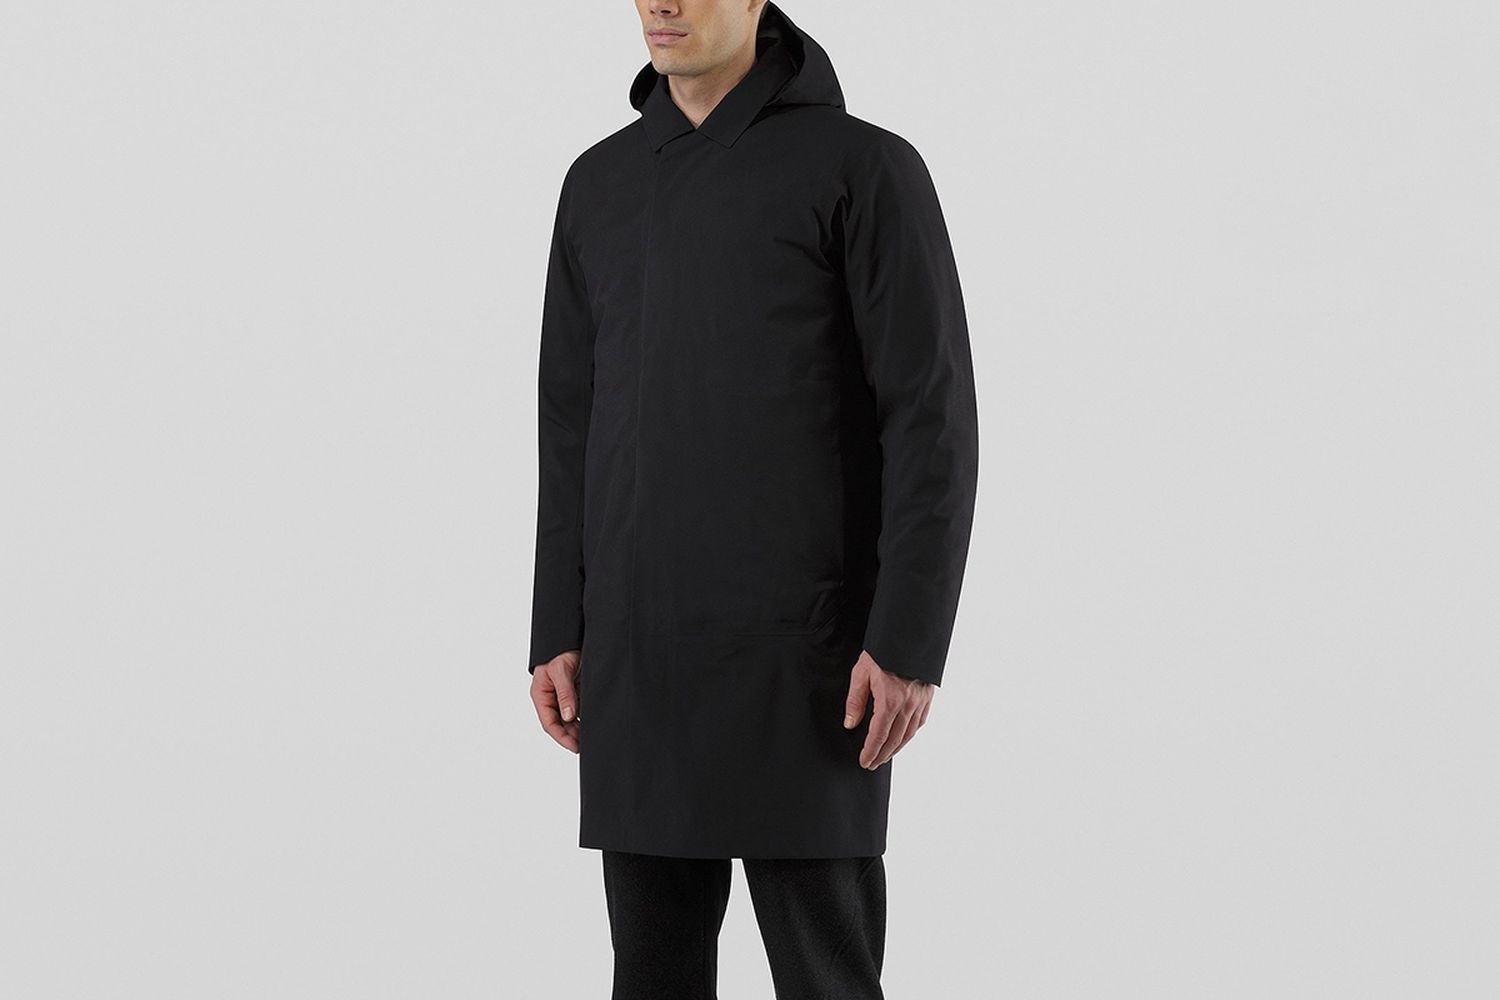 These Arc'teryx Veilance Pieces Are Raw Style & Function